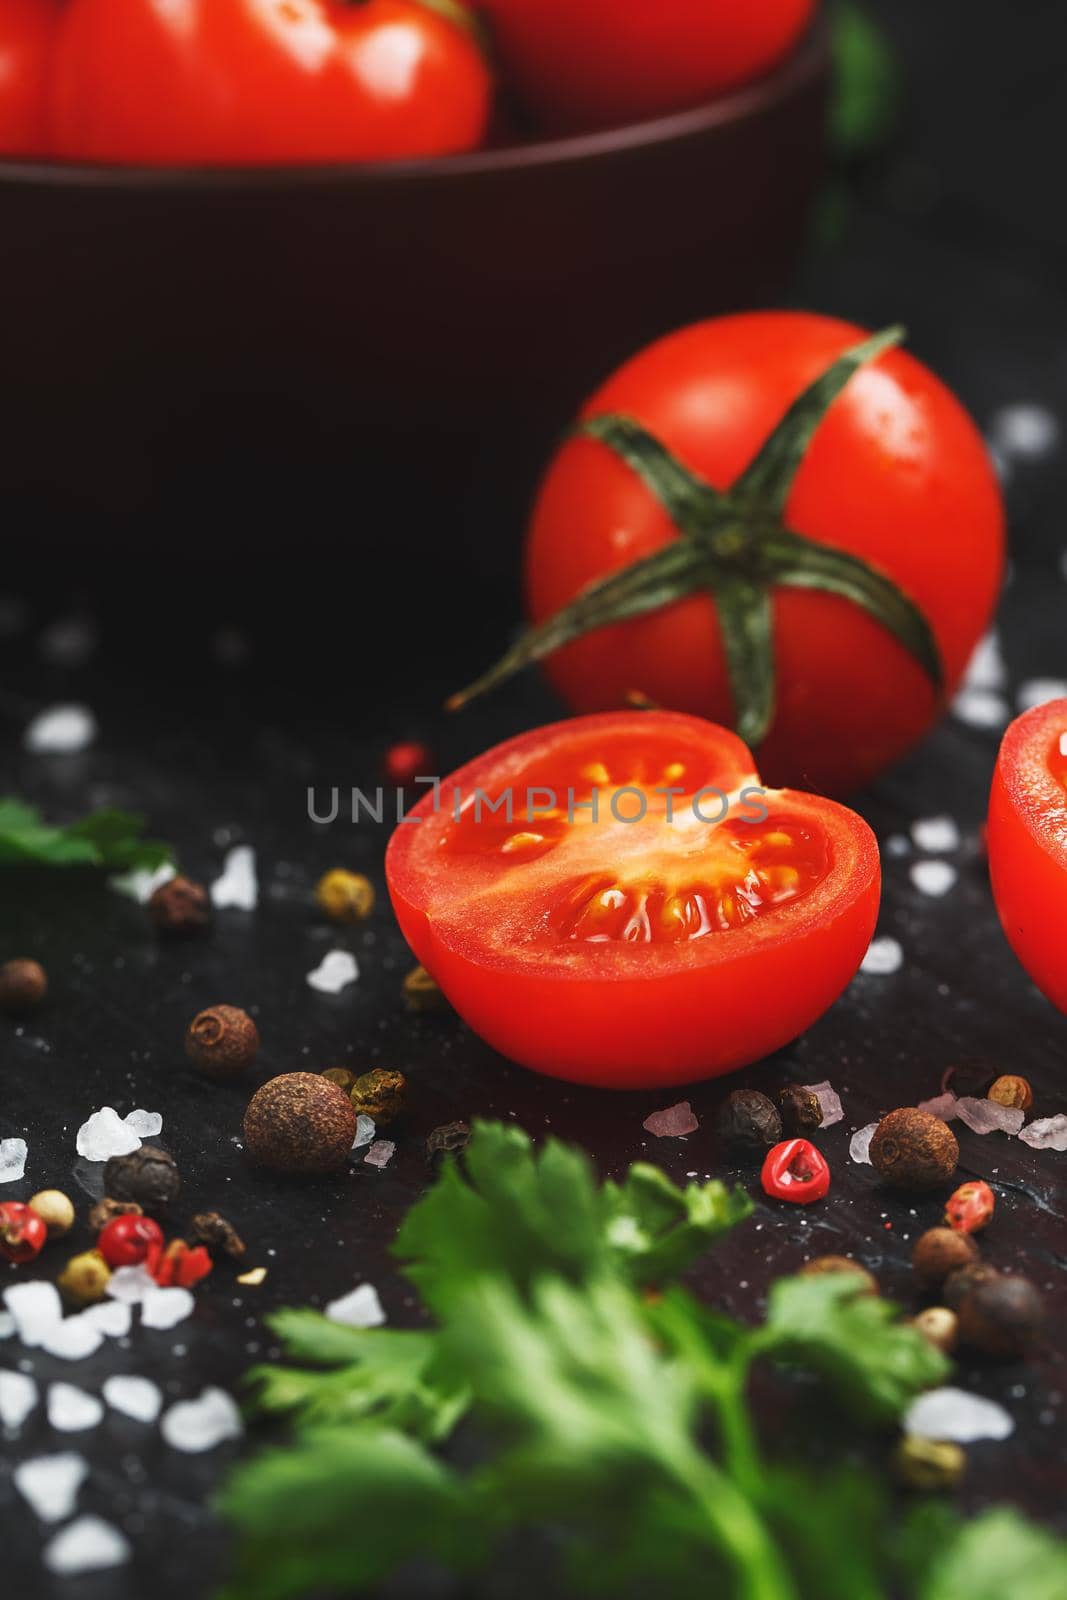 Juicy red cherry tomatoes on a black background with spices, coarse salt and greens. Sliced sweet and ripe tomatoes for salads and as ingredients for cooking. Vertical frame, low contrast